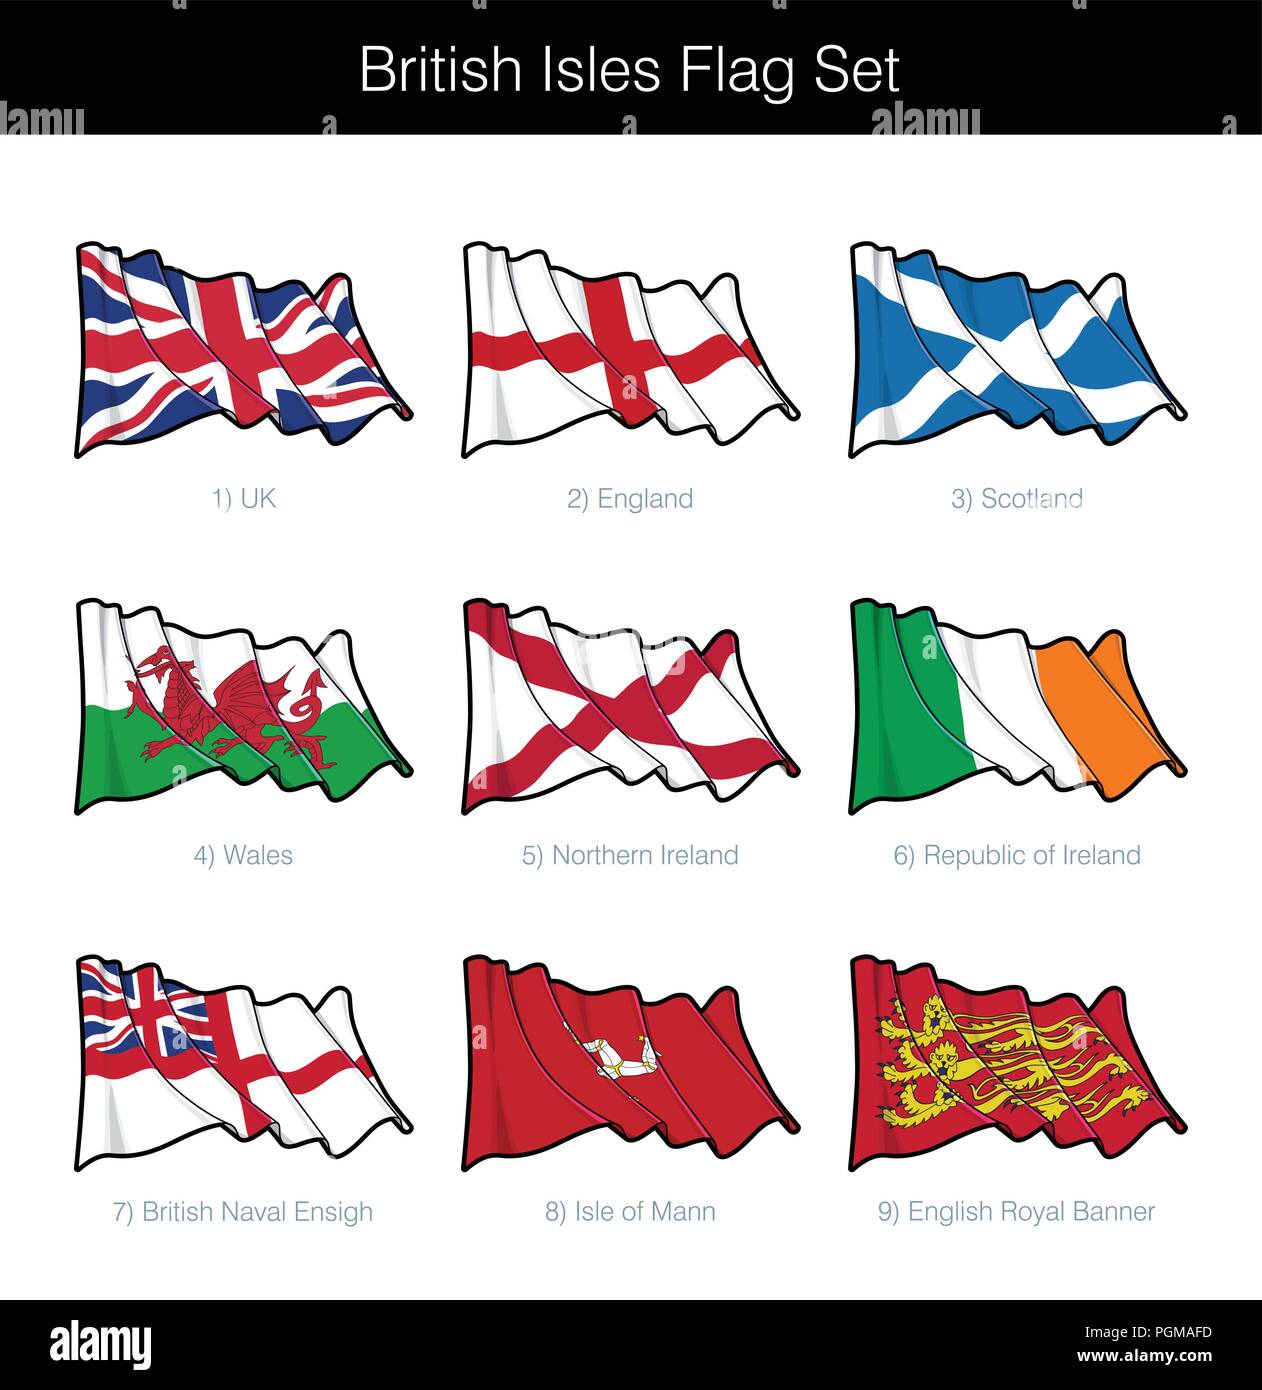 British Isles Waving Flag Set. The set includes the flags of UK, England, Scotland, Wales, Northern Ireland, Republic of Ireland, the British Navy, Is Stock Vector